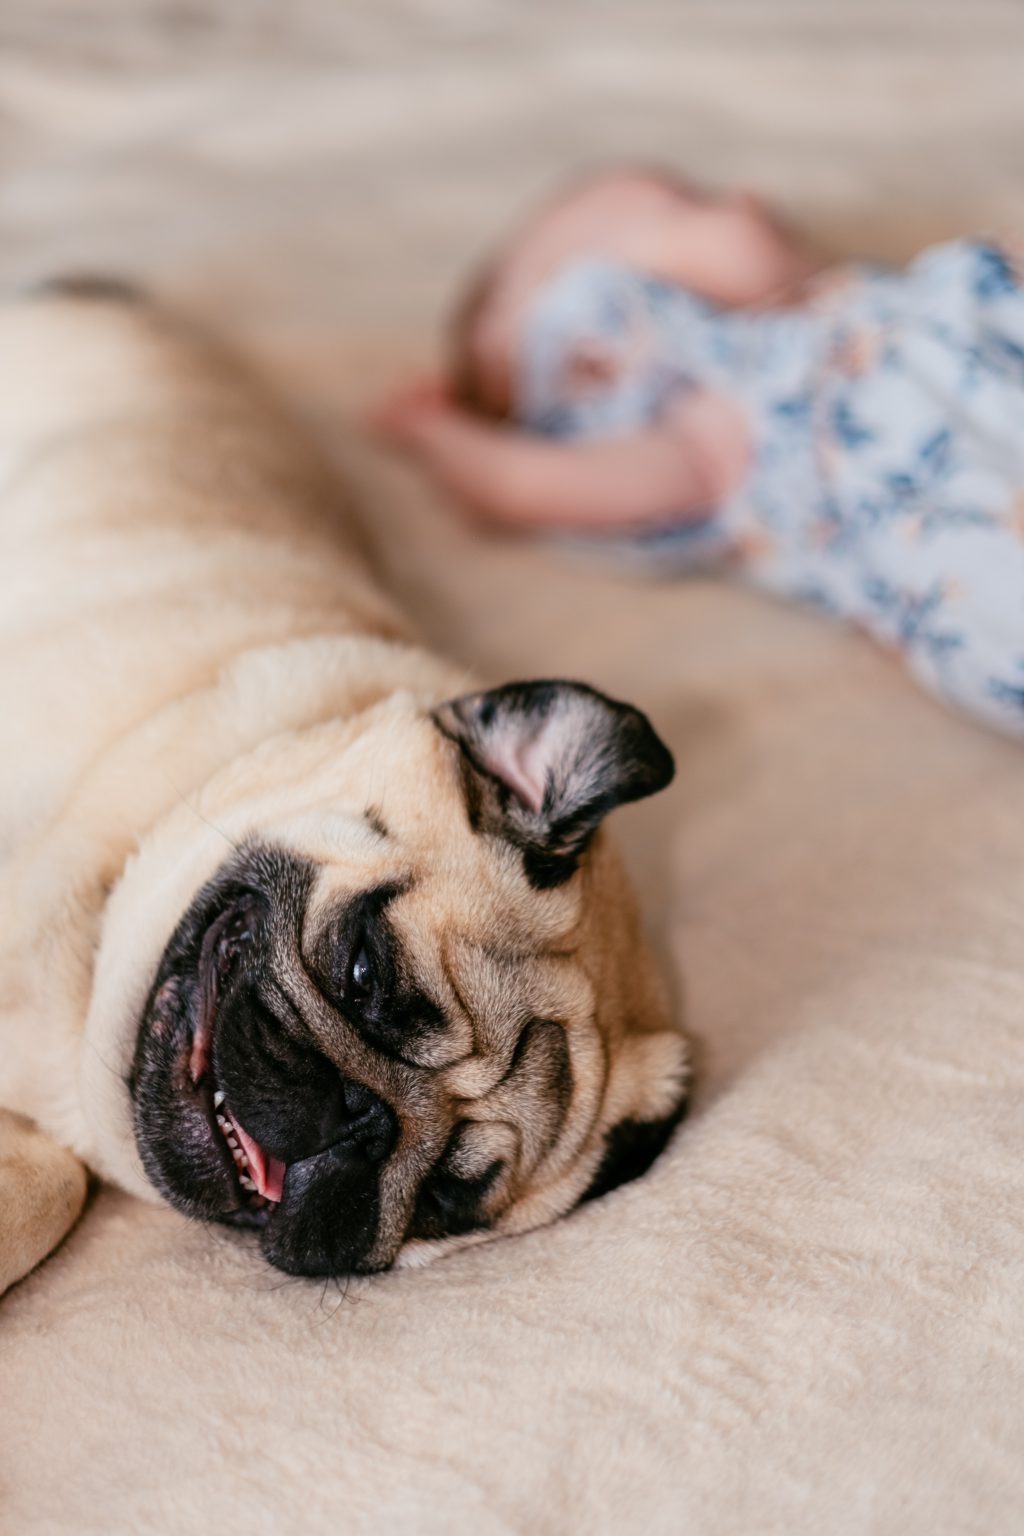 A happy pug lying on the bed with a baby - free stock photo